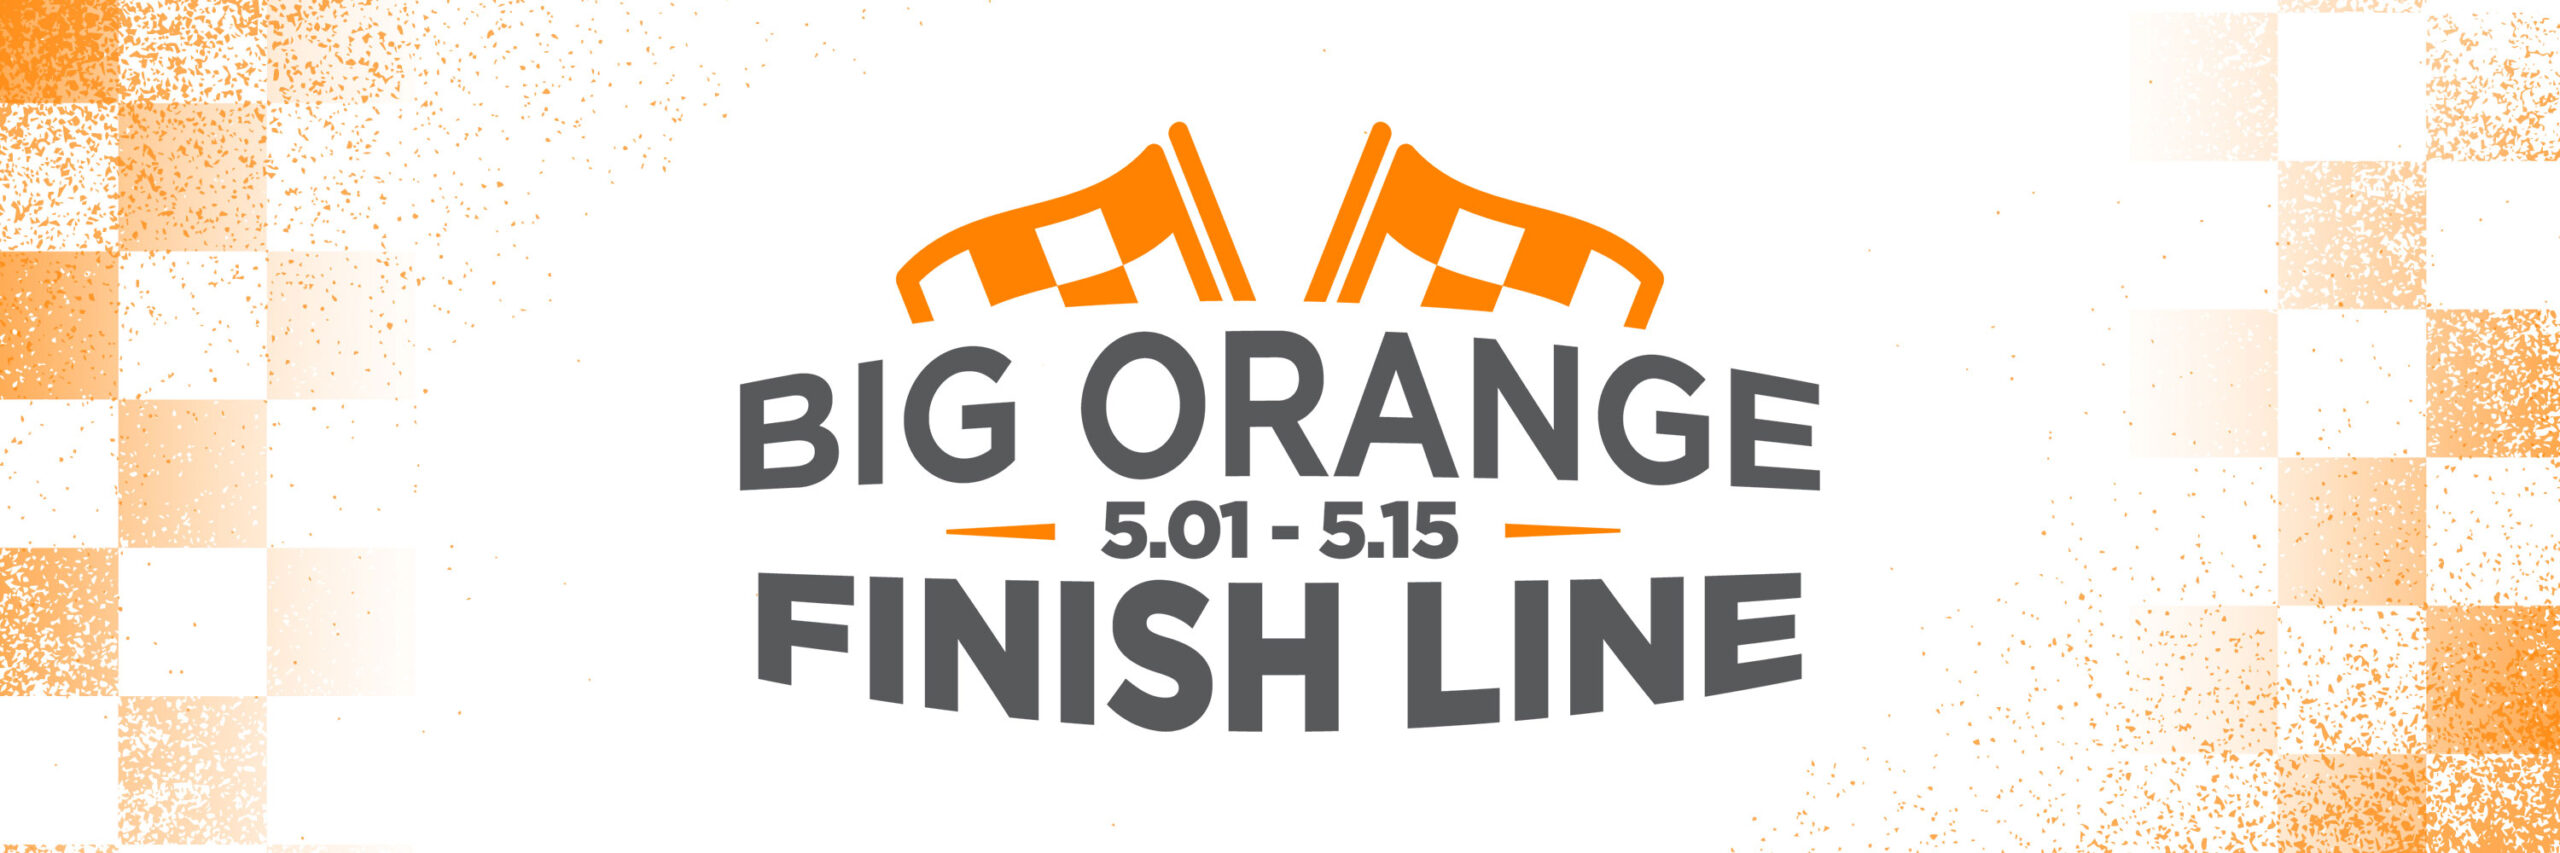 Big Orange Finish Line logo with the dates of May 1 through May 15